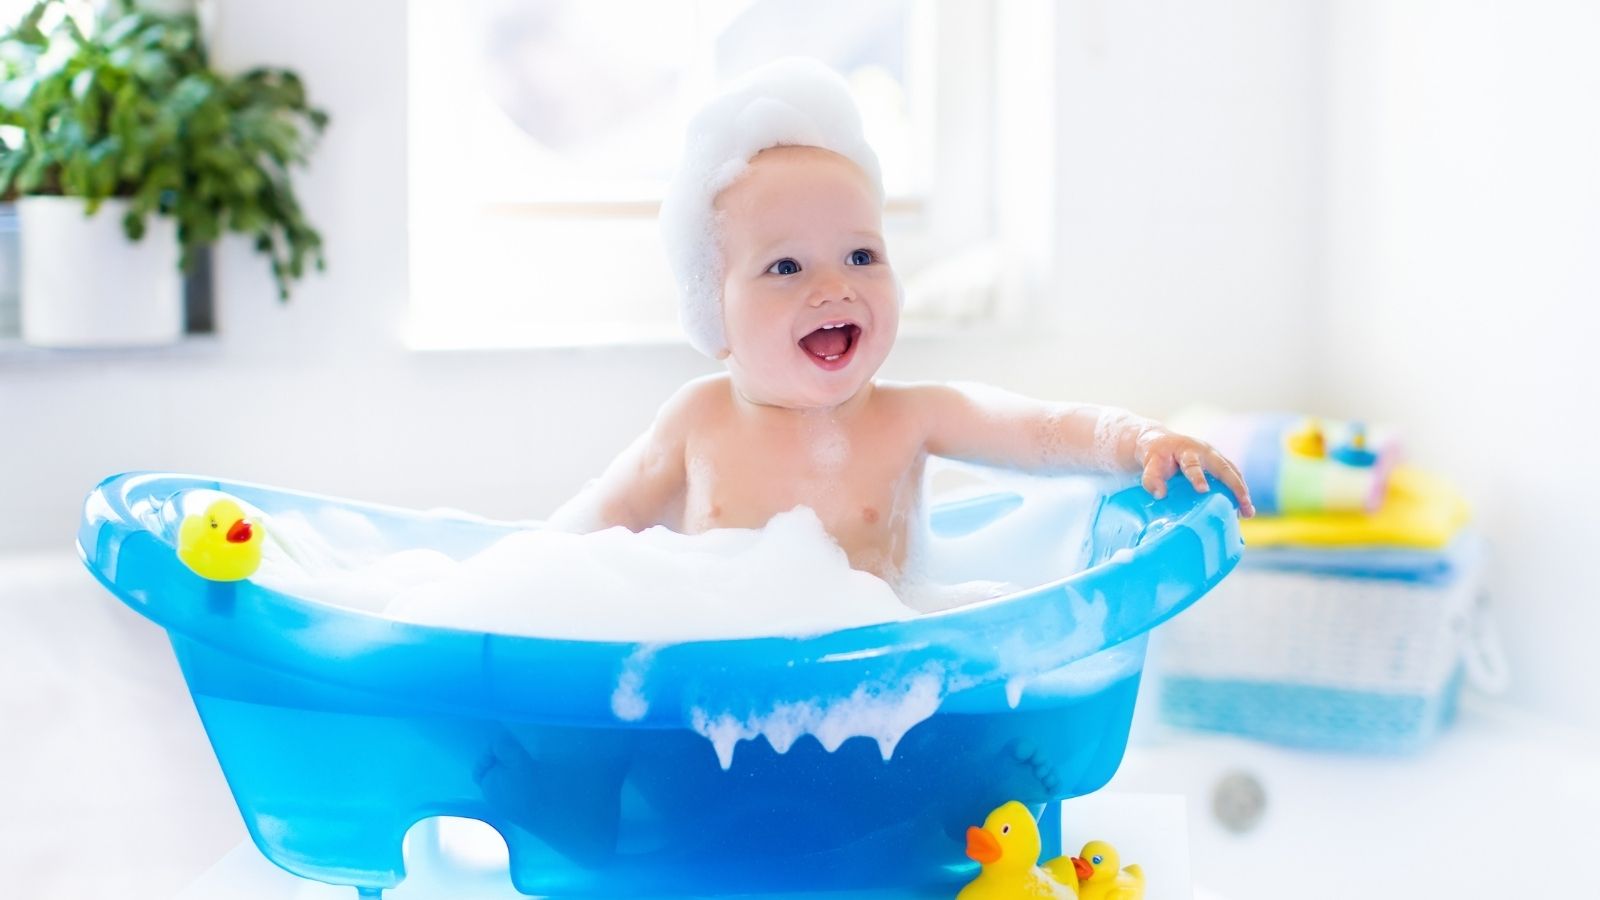 What to look for in a baby shampoo